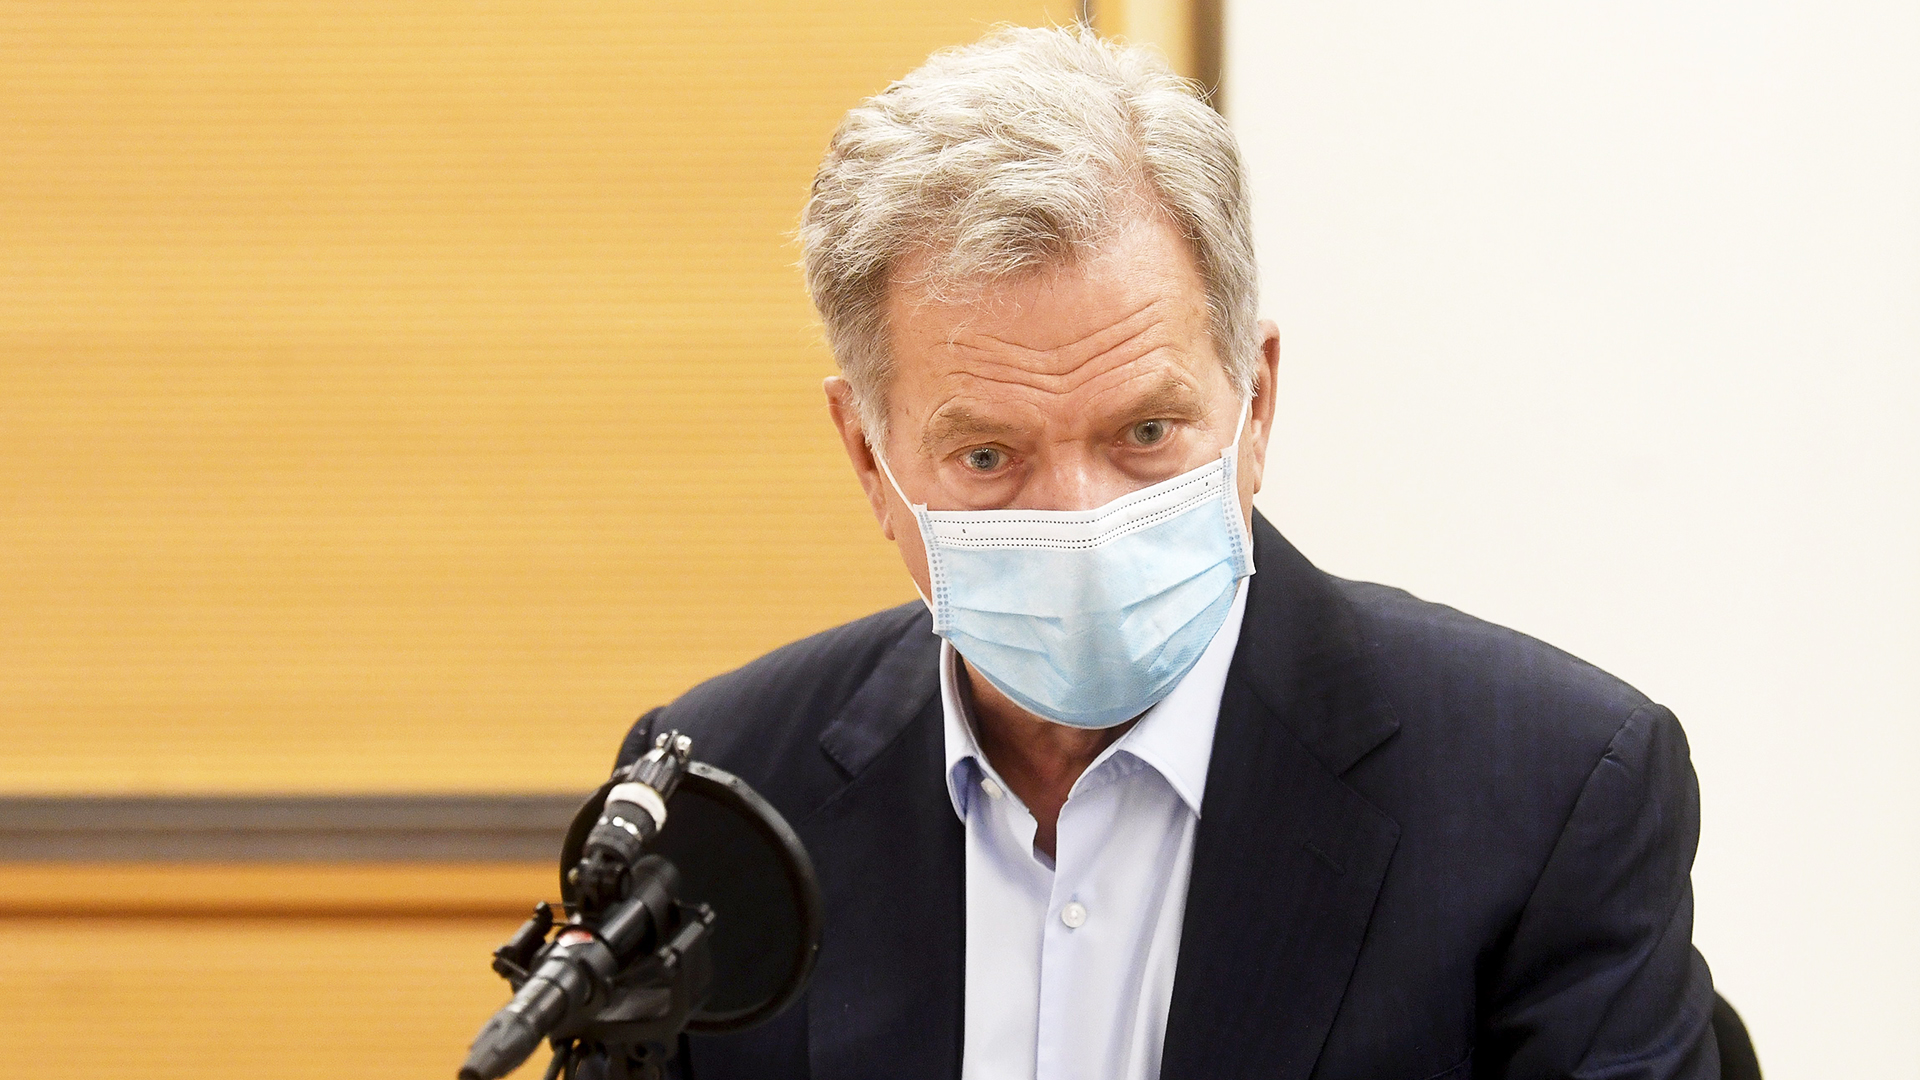 Niinistö beats EU vaccination purchases, suggests that Finland could consider direct purchases